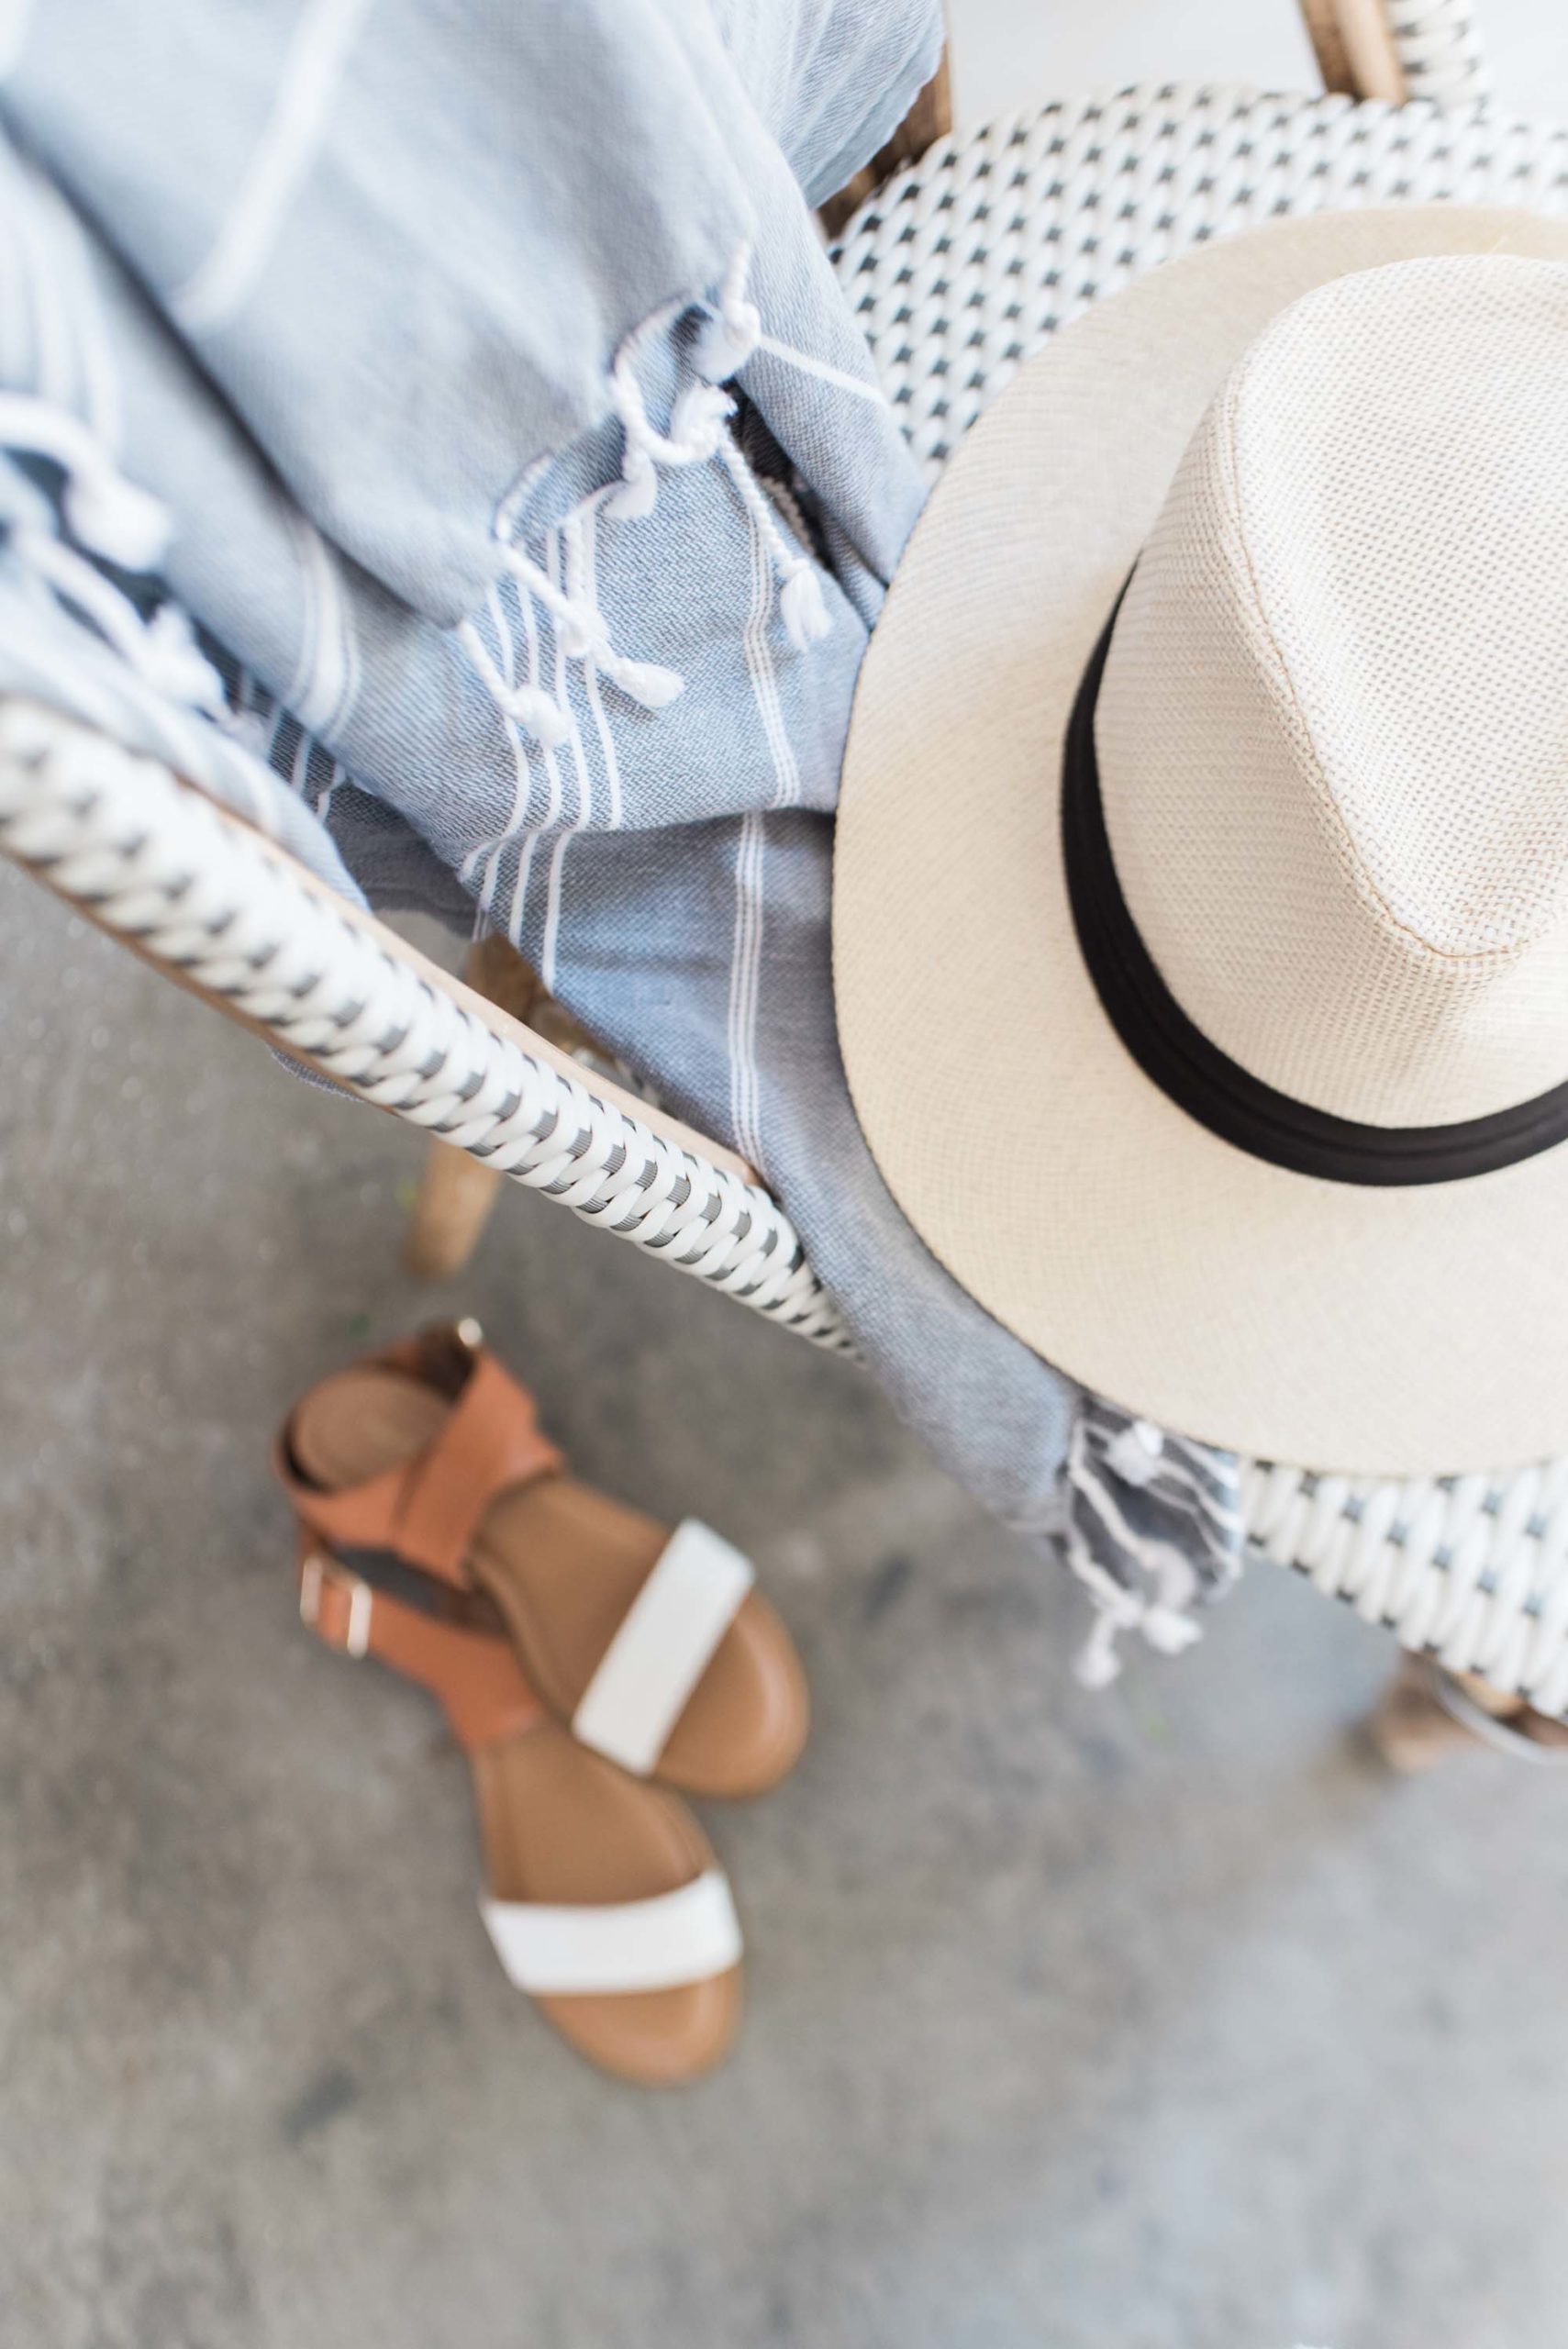 My tips for traveling with your favorite hats